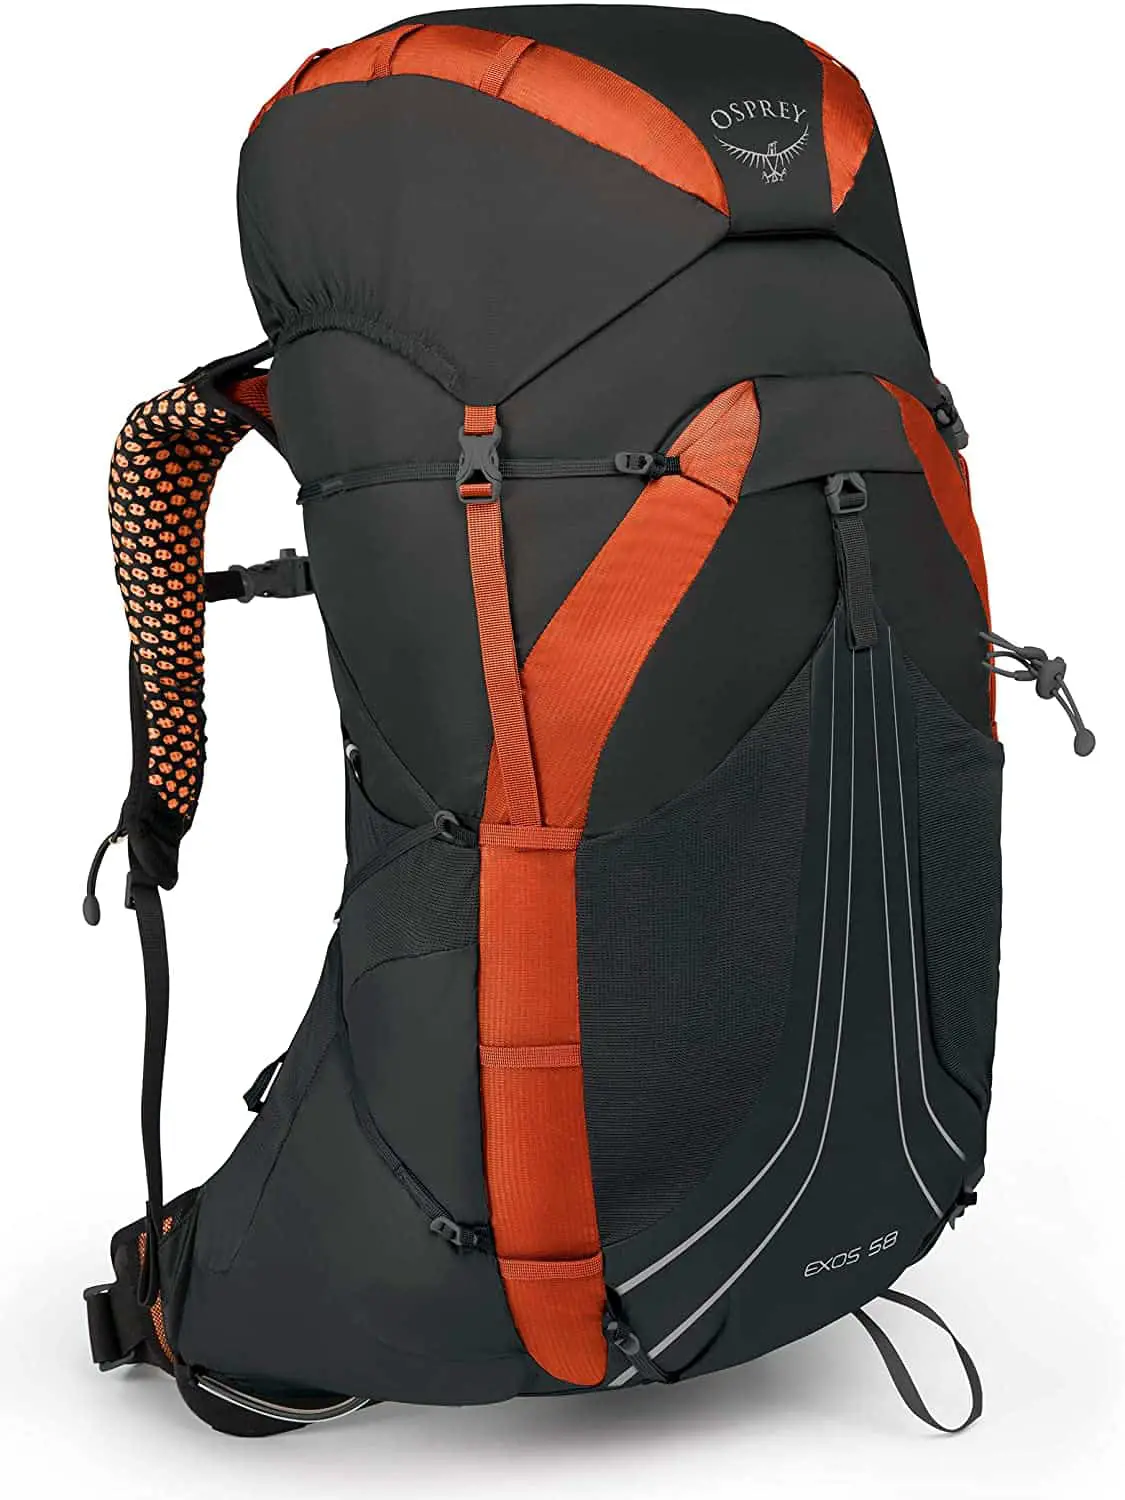 Osprey Exos from front